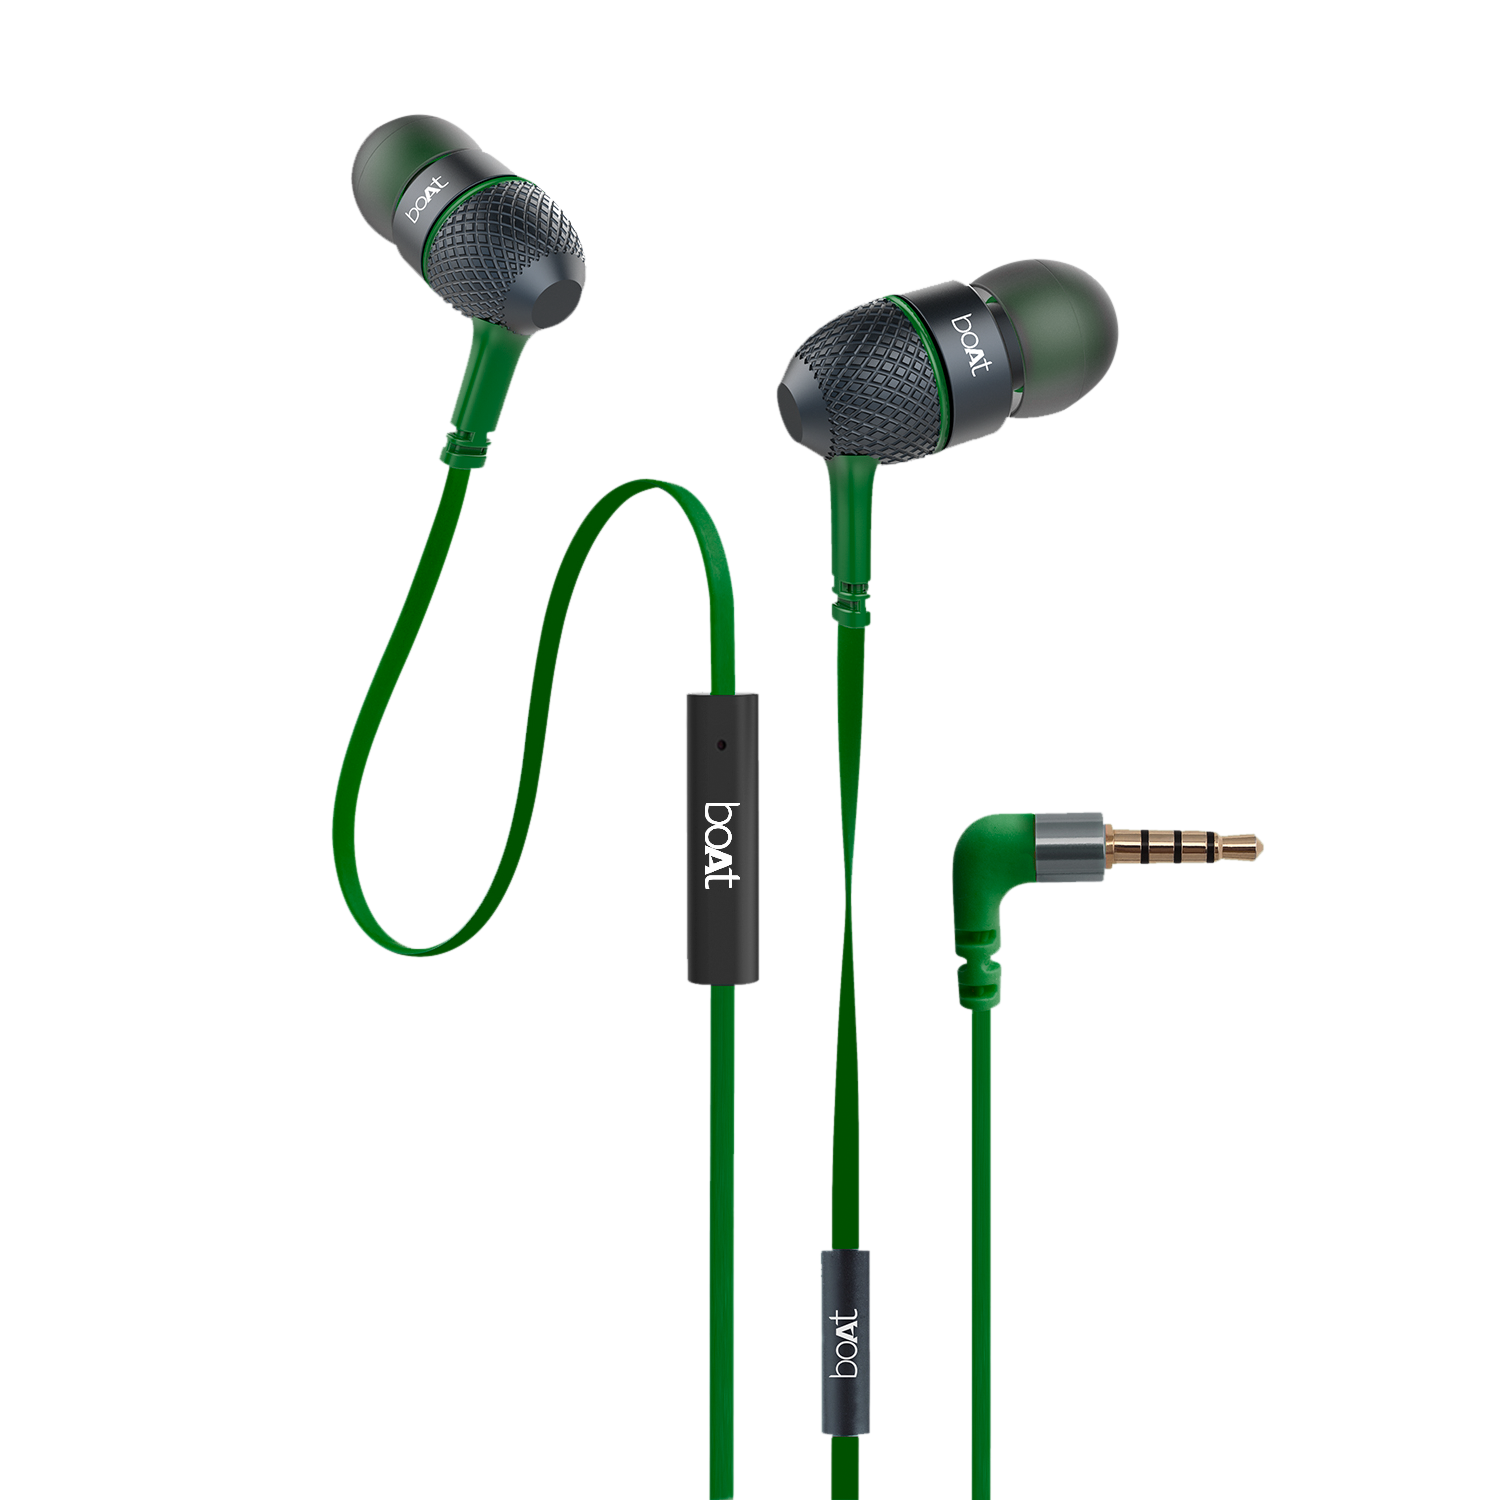 Bassheads 228 | Wired Earphones with Poweful 10mm Driver, Passive Noise Cancellation, Polished metal design